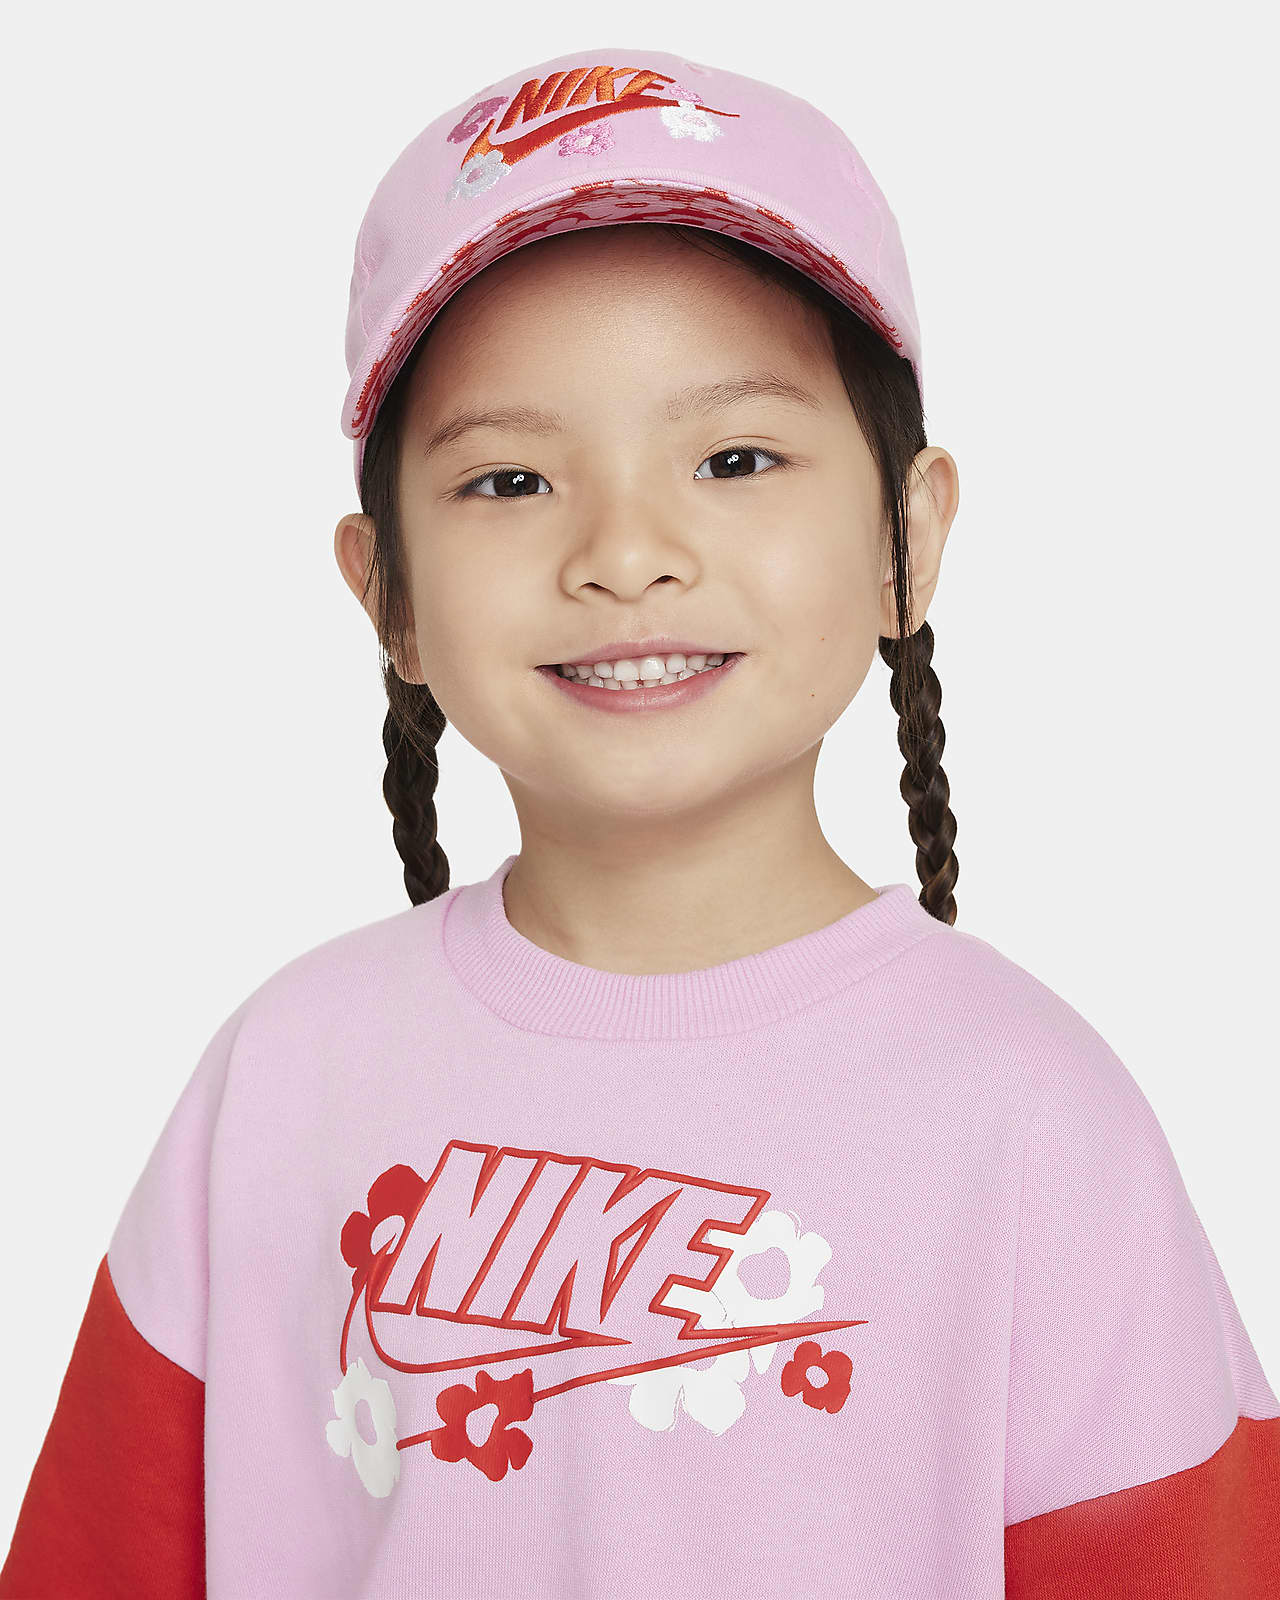 Nike "Your Move" Little Kids' Cap